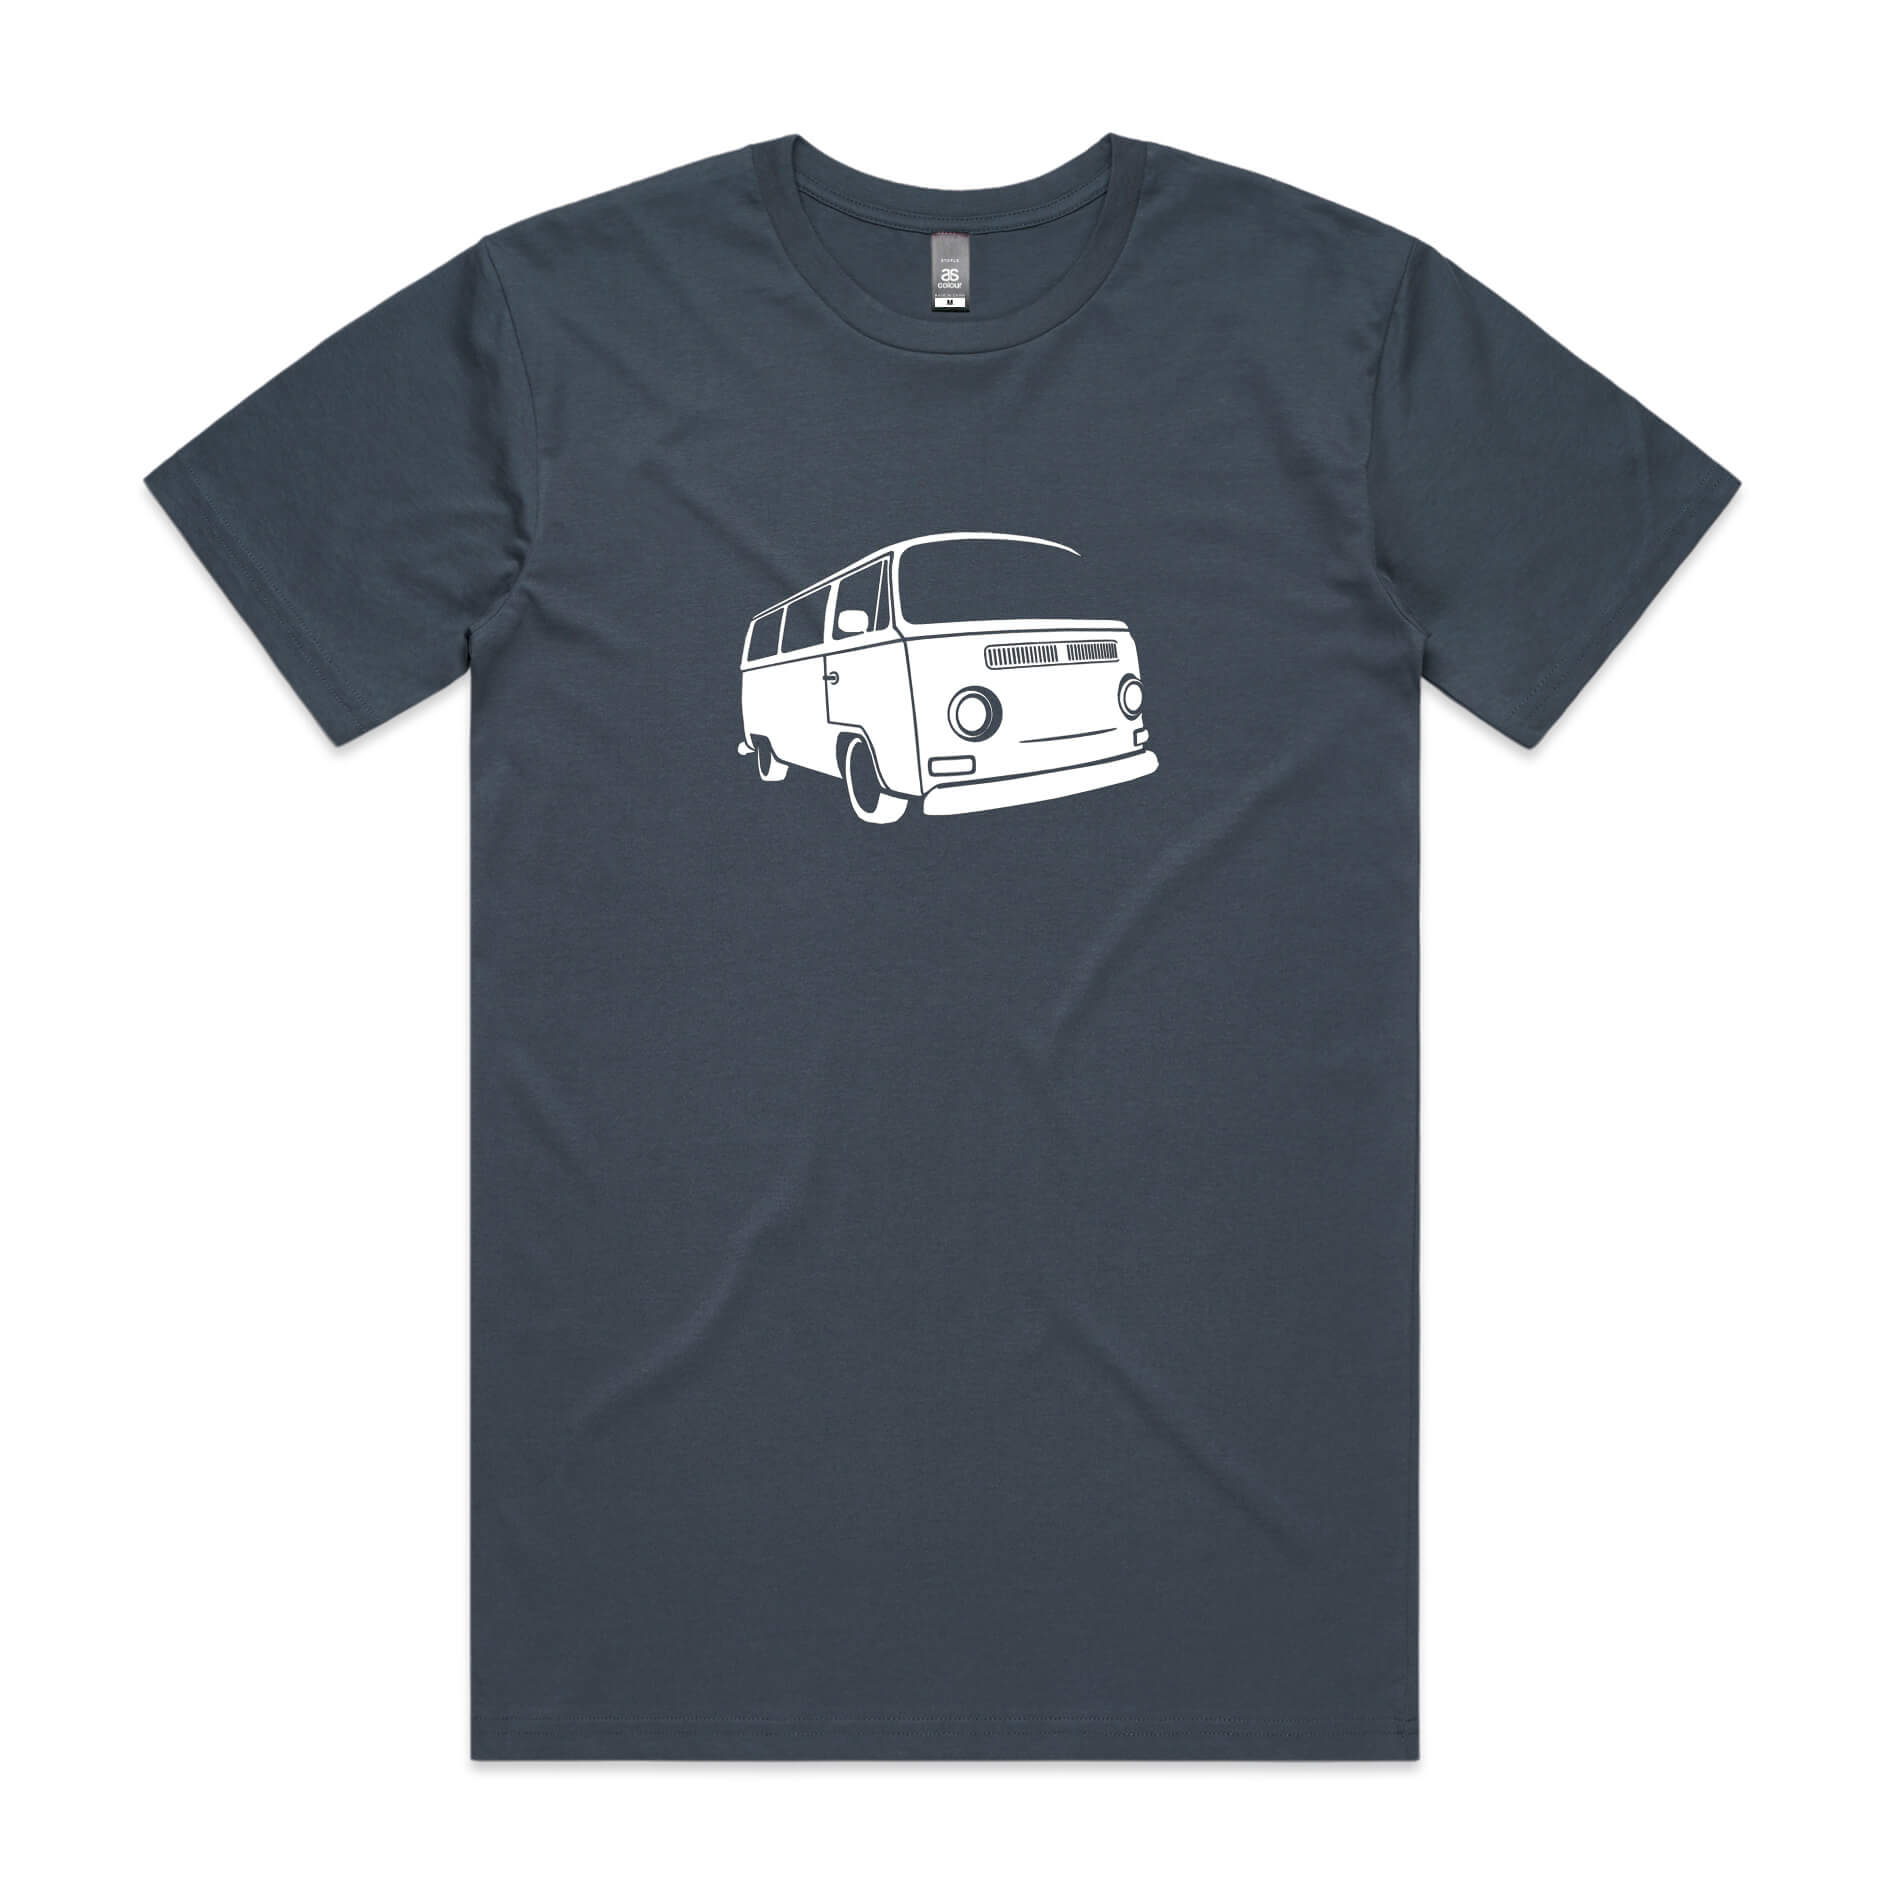 VW Kombi t-shirt in petrol blue with white Volkswagen bus graphic